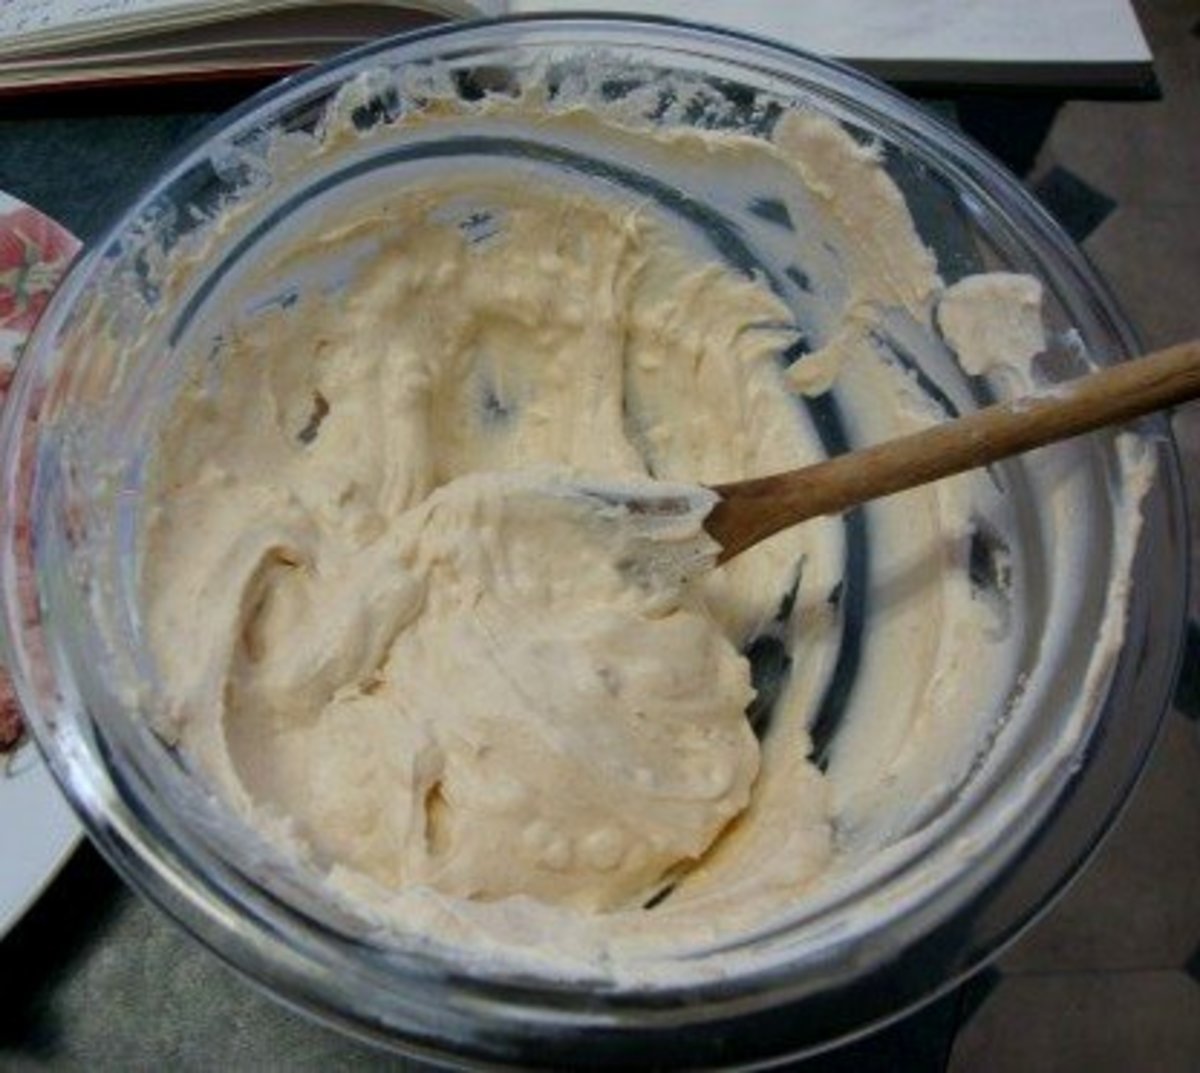 Preparing the cheese ball mixture by mixing cream cheese and mayonnaise.